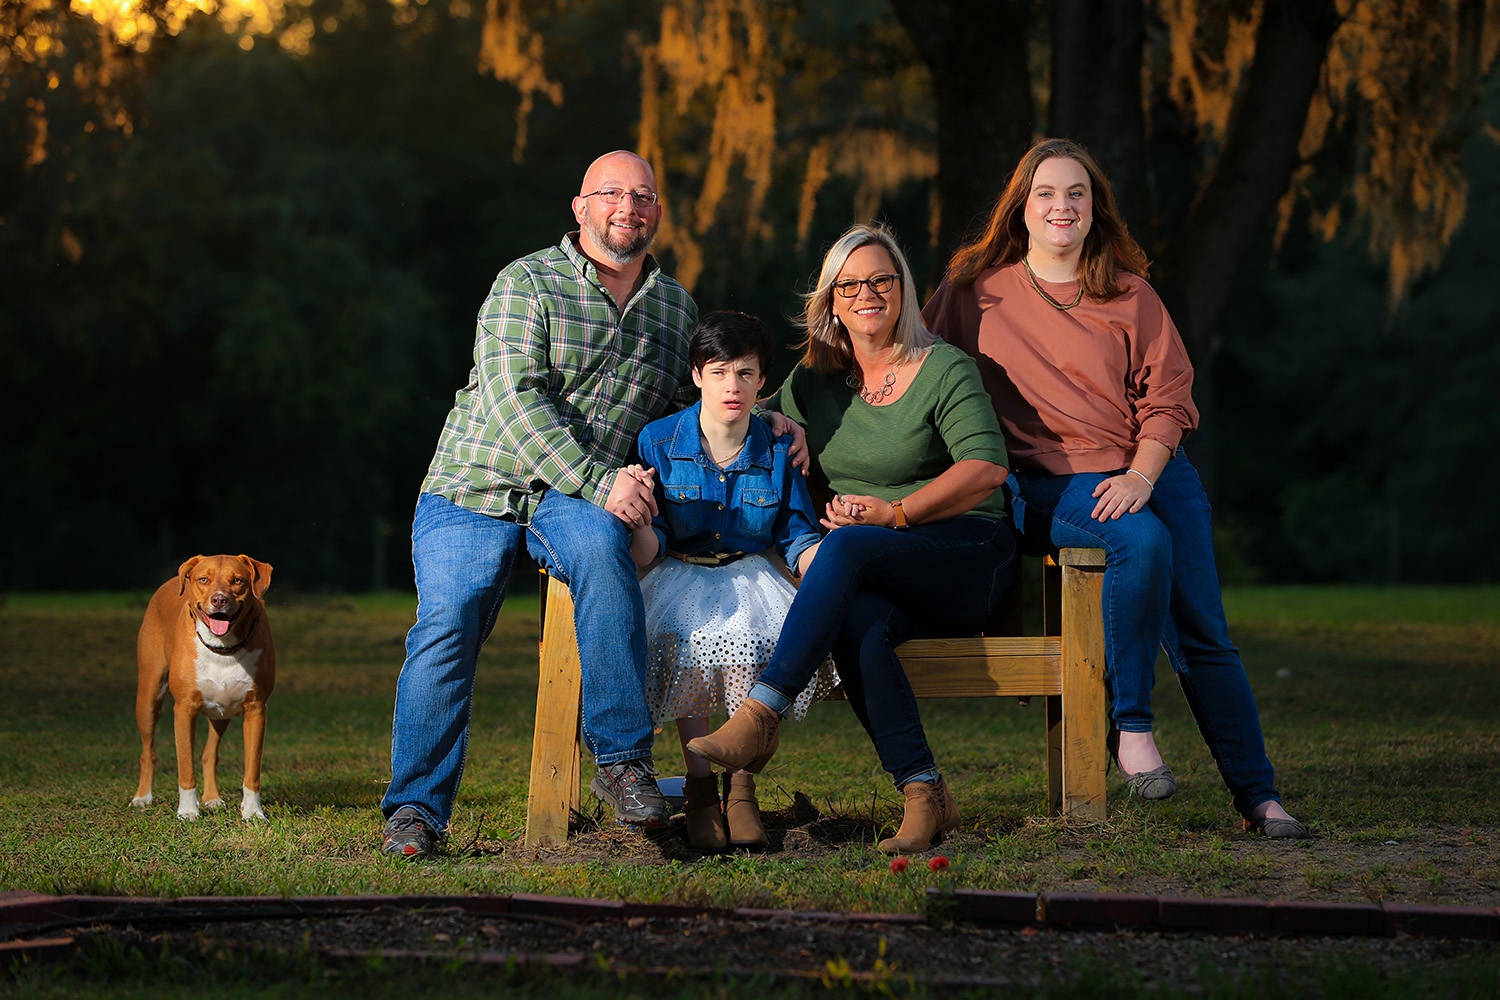 Jay and Melanie Anderson family photos taken on Saturday, Oct. 17, 2020 at their home in Trenton, Florida.